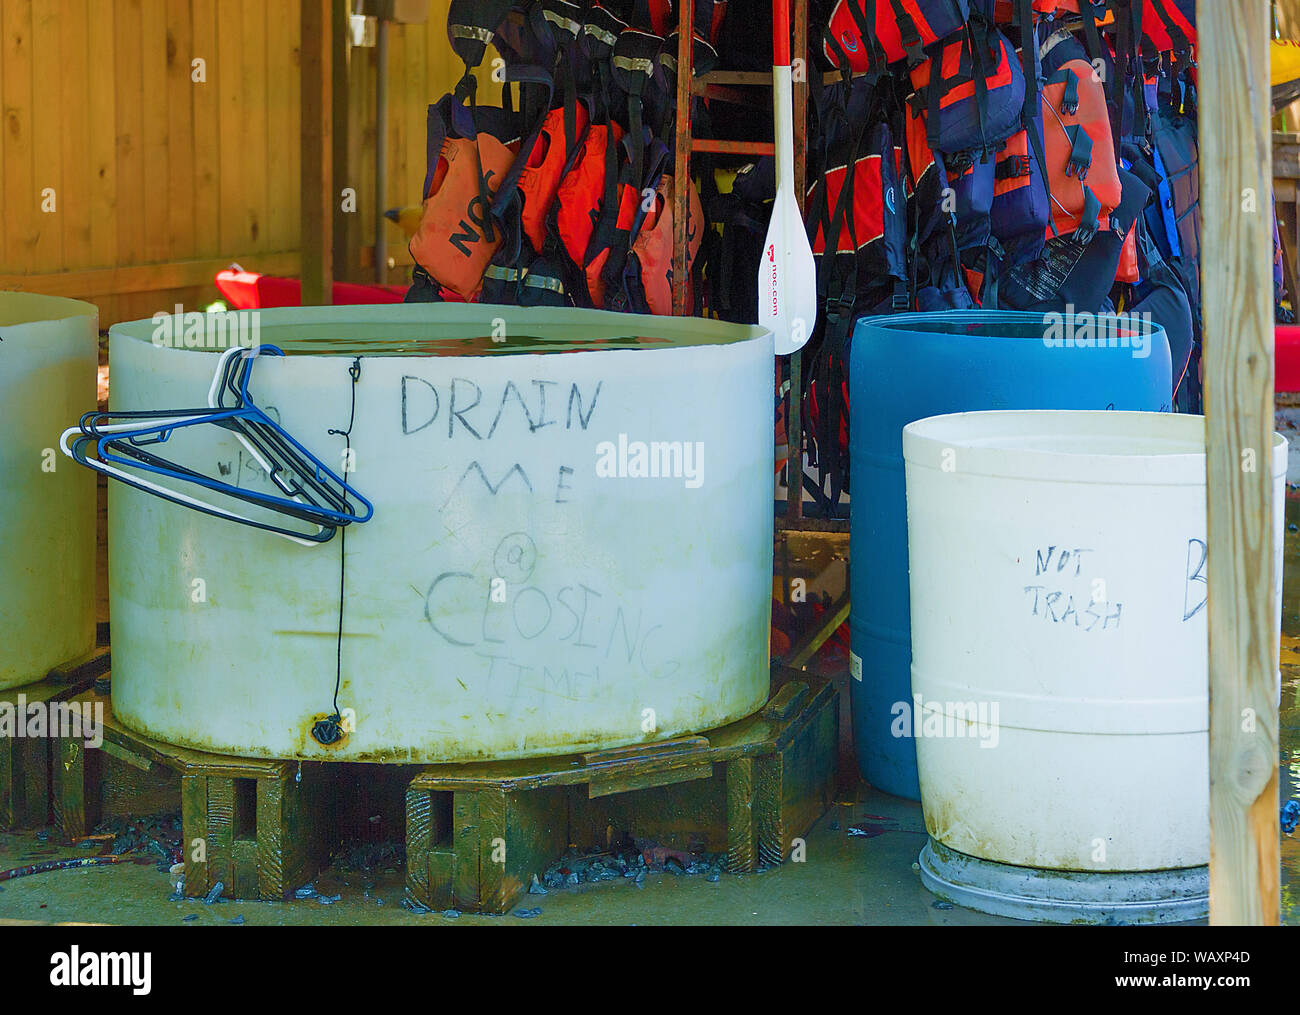 Bryson, North Carolina, USA - August 3, 2019:  Outside rinsing containers for equipment used by patrons renting equipment at Nantahala Outdoor Center. Stock Photo